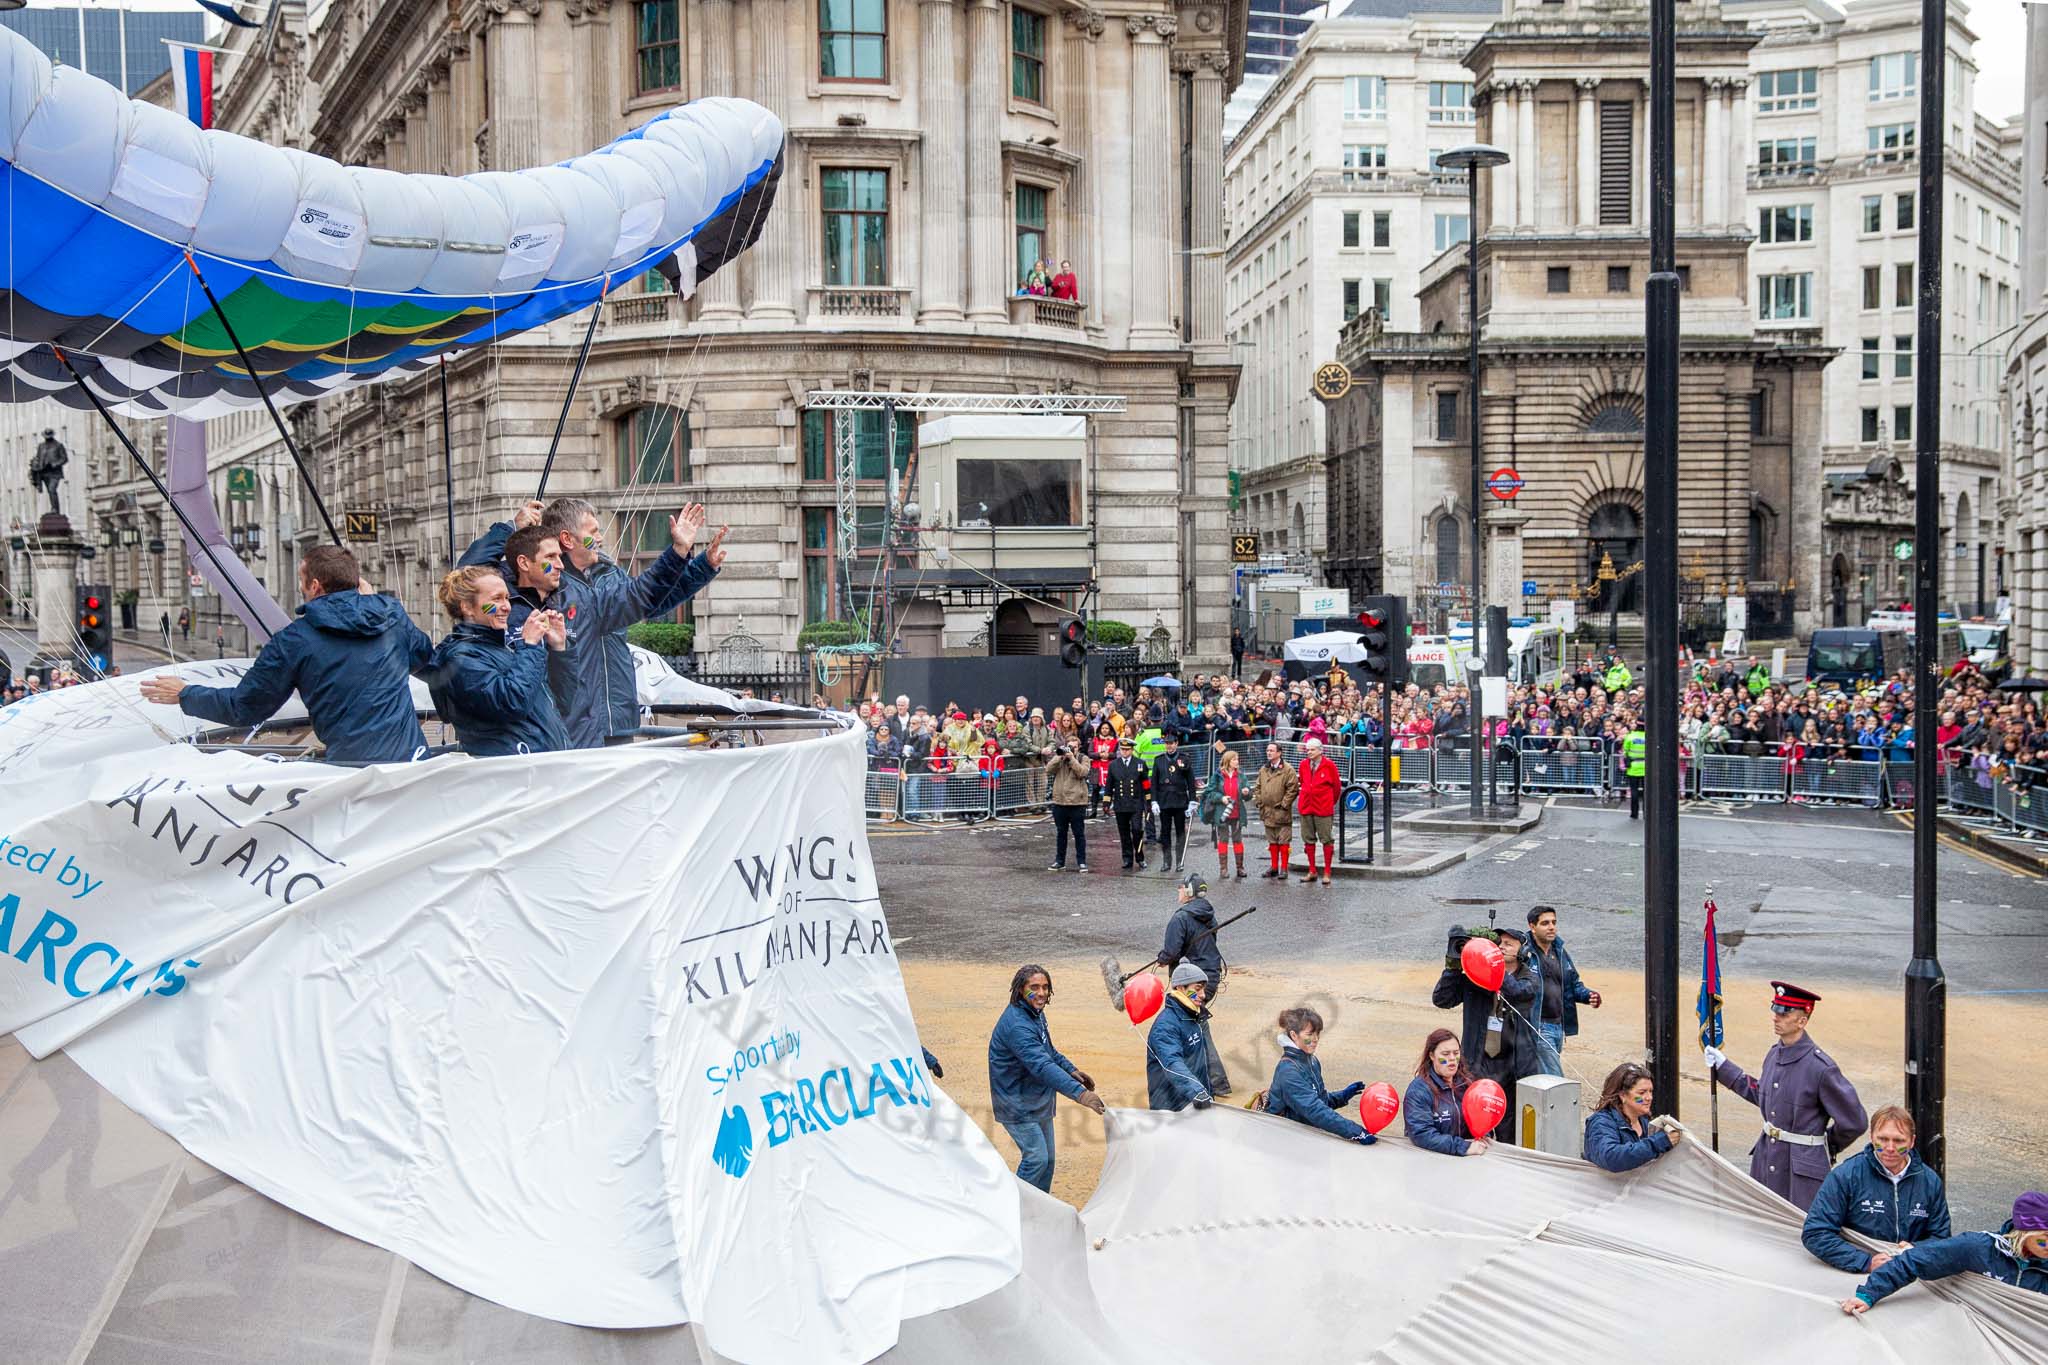 Lord Mayor's Show 2012: Entry 22 - Wings of Kilimanjaro - paraglider pi;ots about to fly from Mt Kilimanjaro for charity..
Press stand opposite Mansion House, City of London,
London,
Greater London,
United Kingdom,
on 10 November 2012 at 11:10, image #384